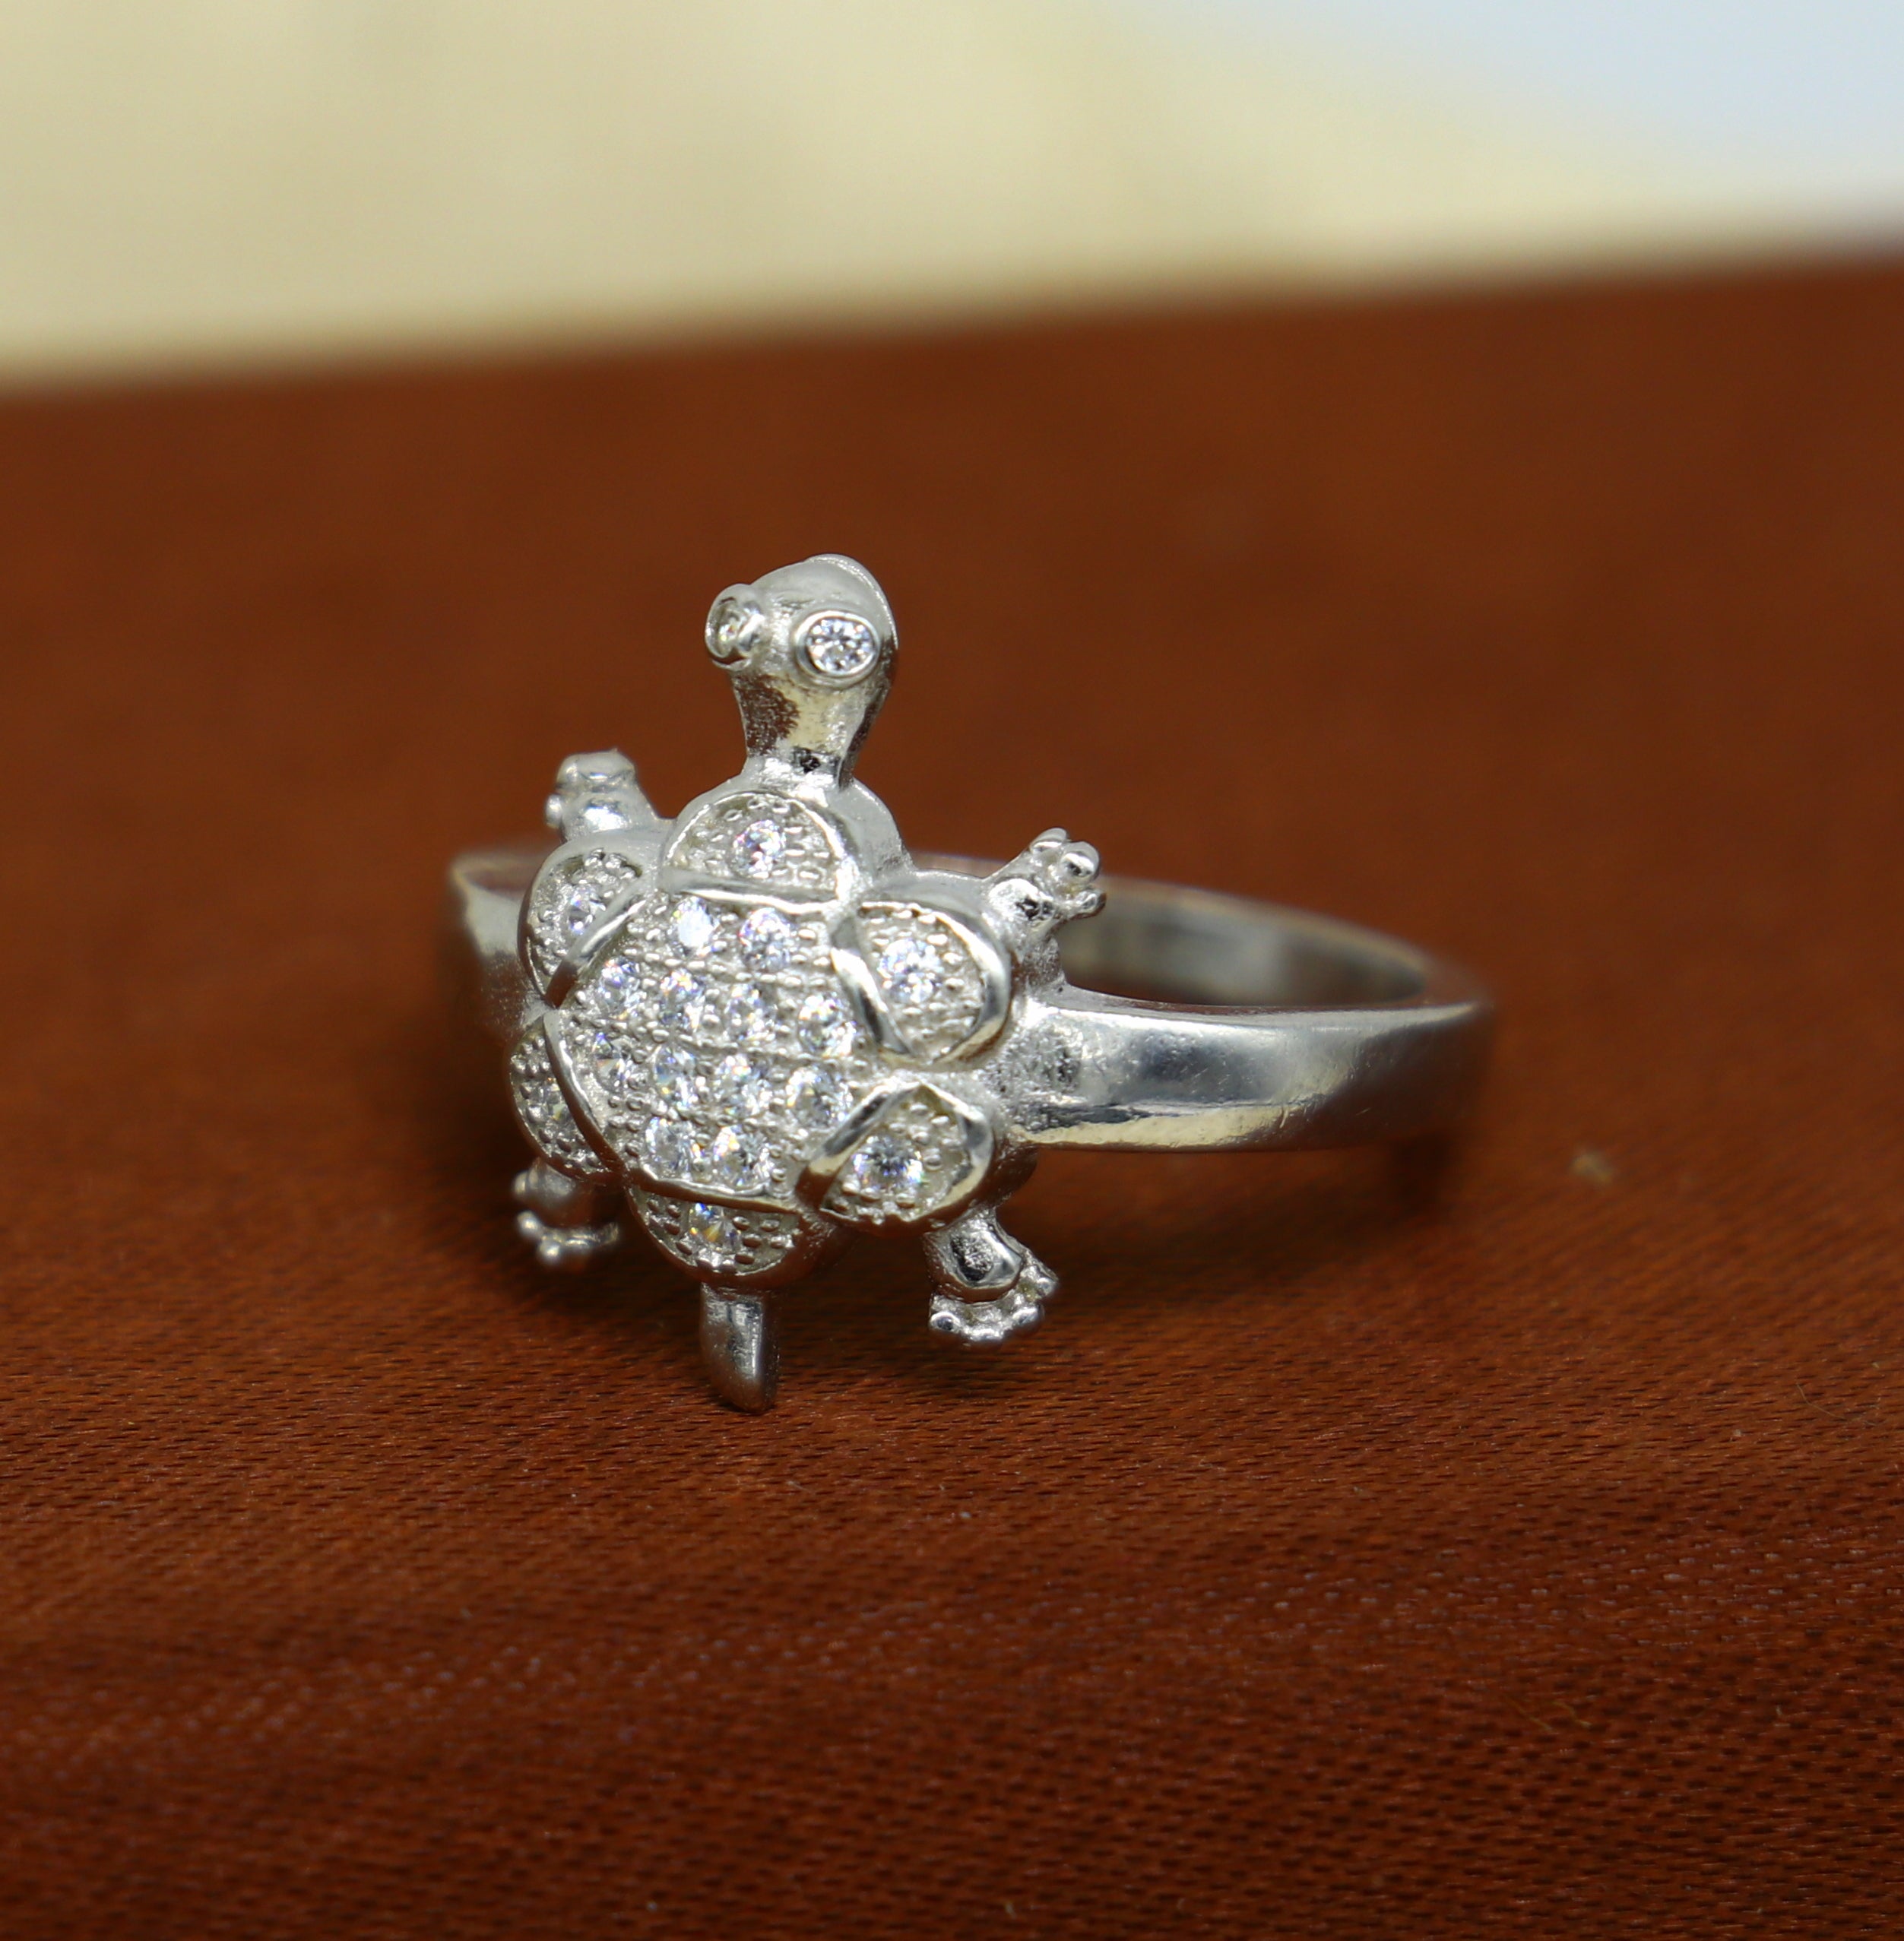 What are the benefits and rules of a tortoise ring? - Quora